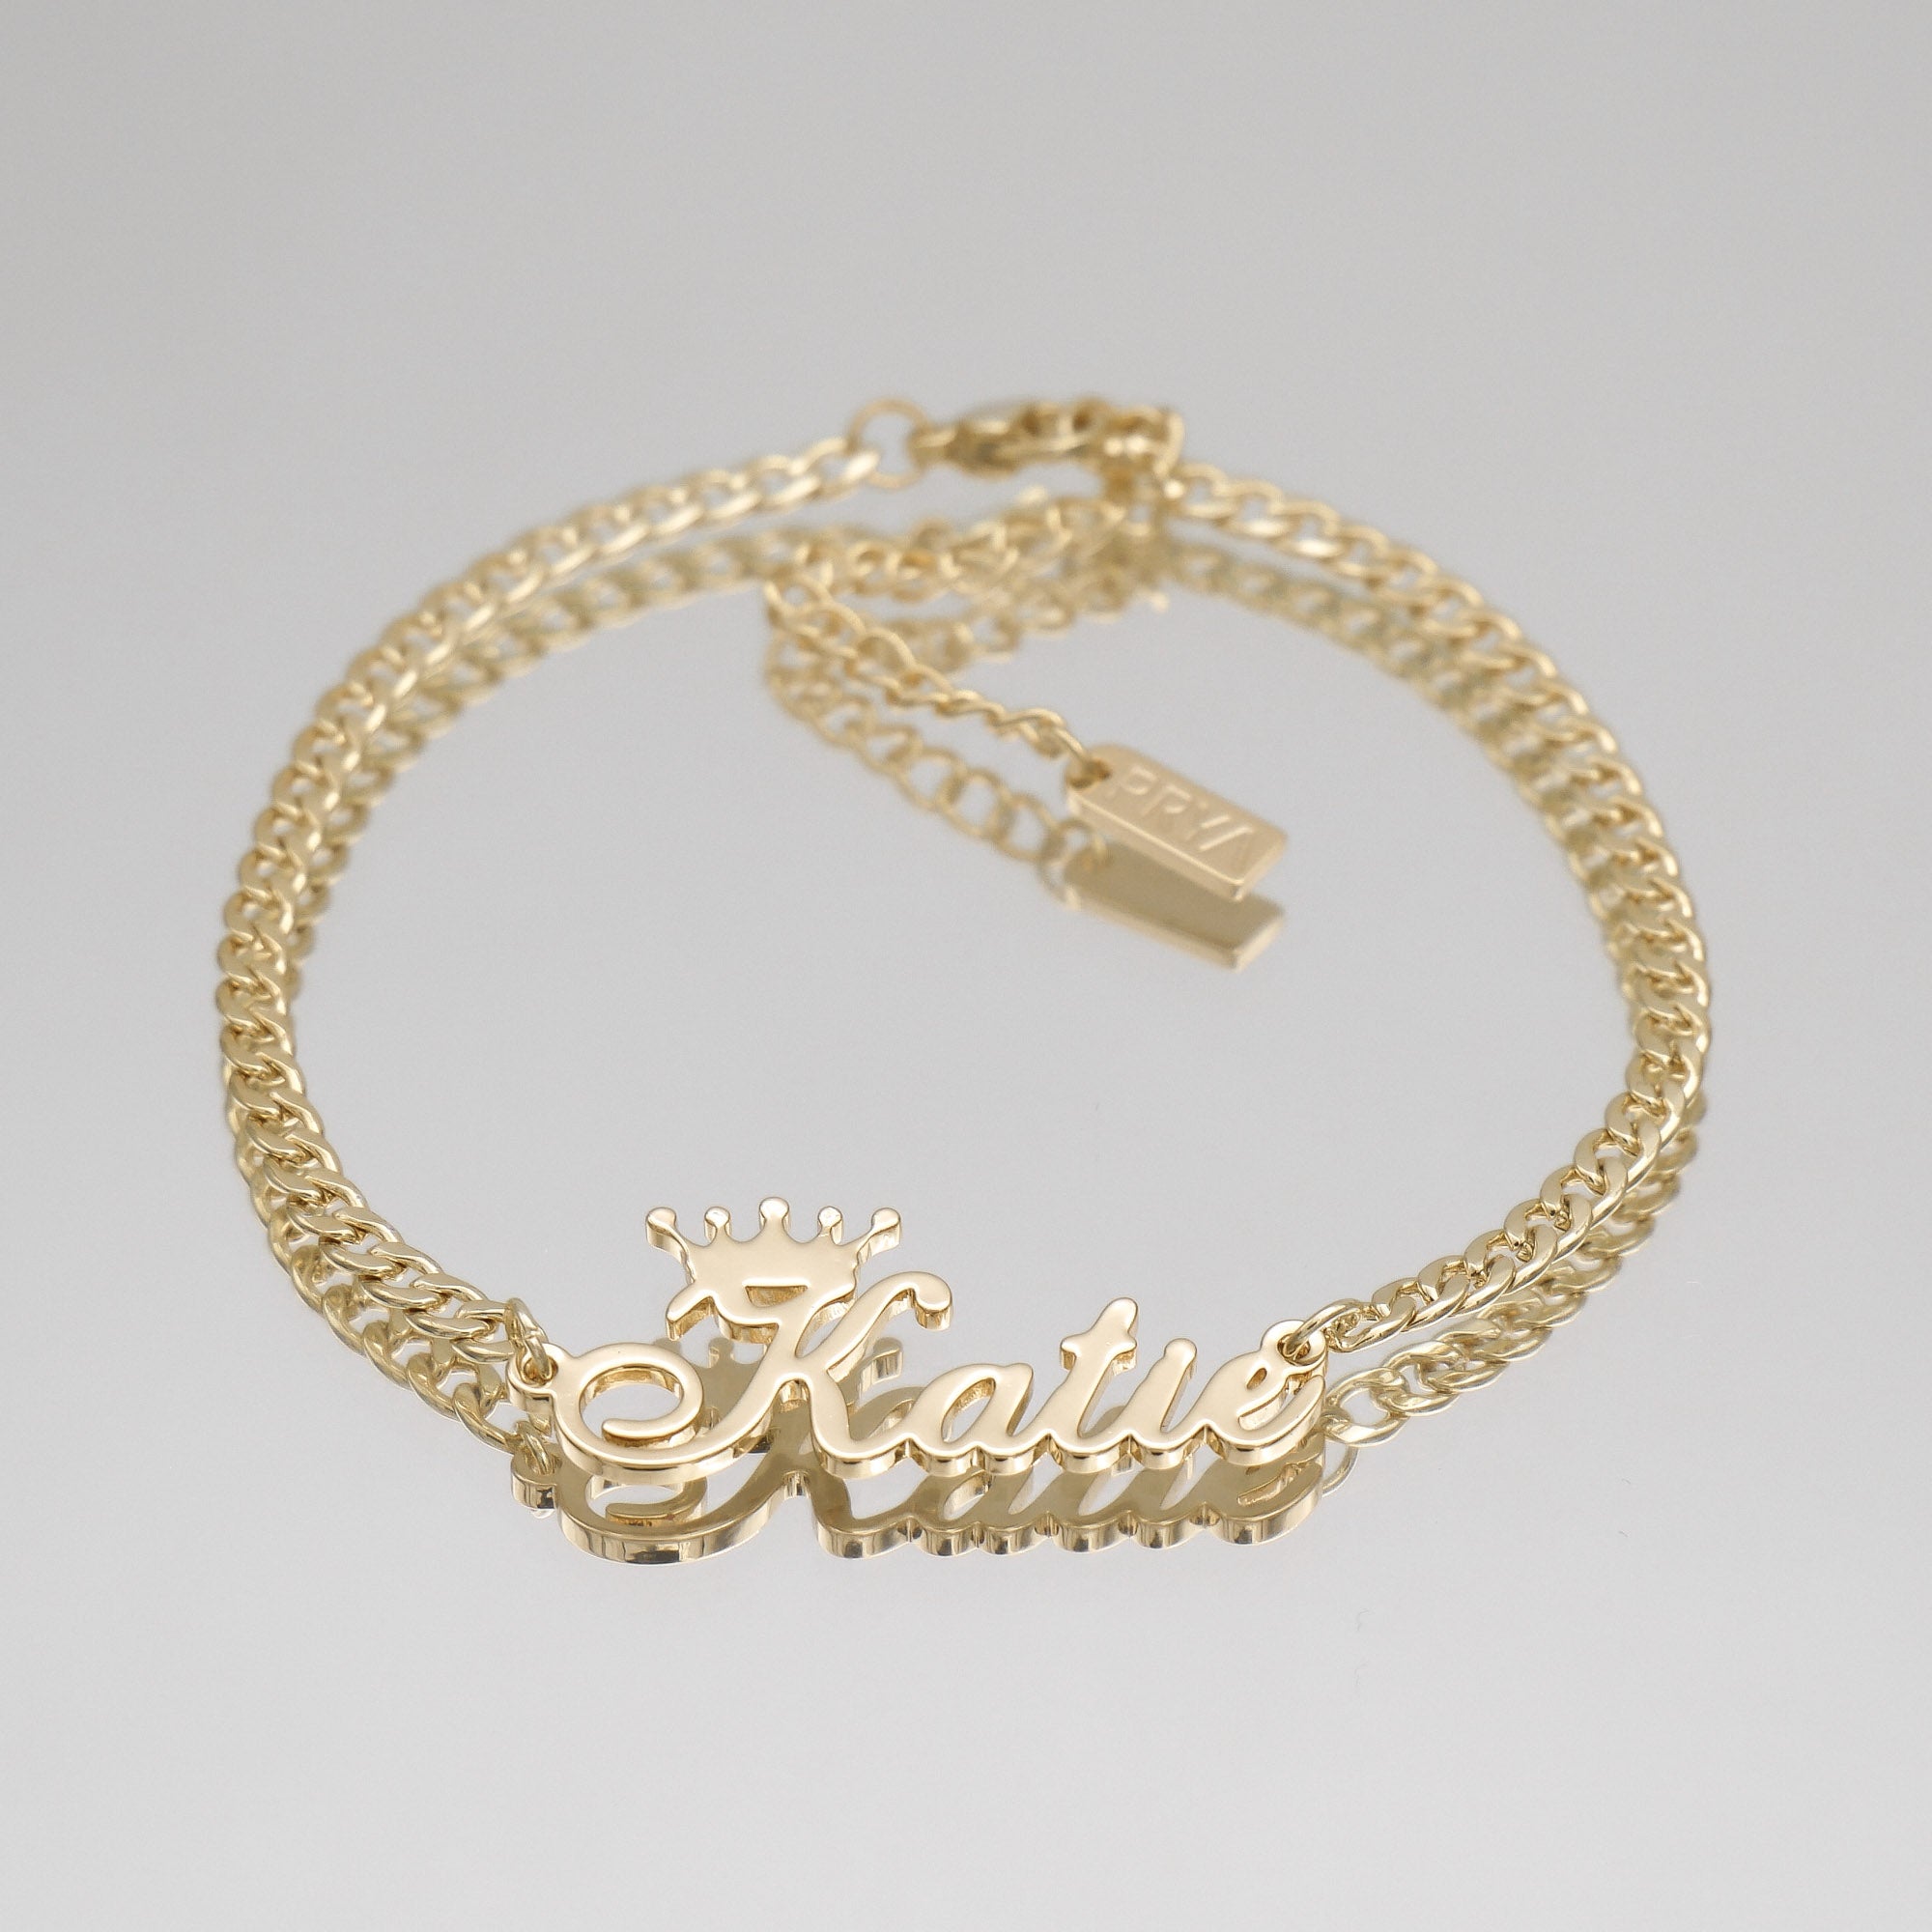 Yellow gold personalised name anklet with Cuban link chain.